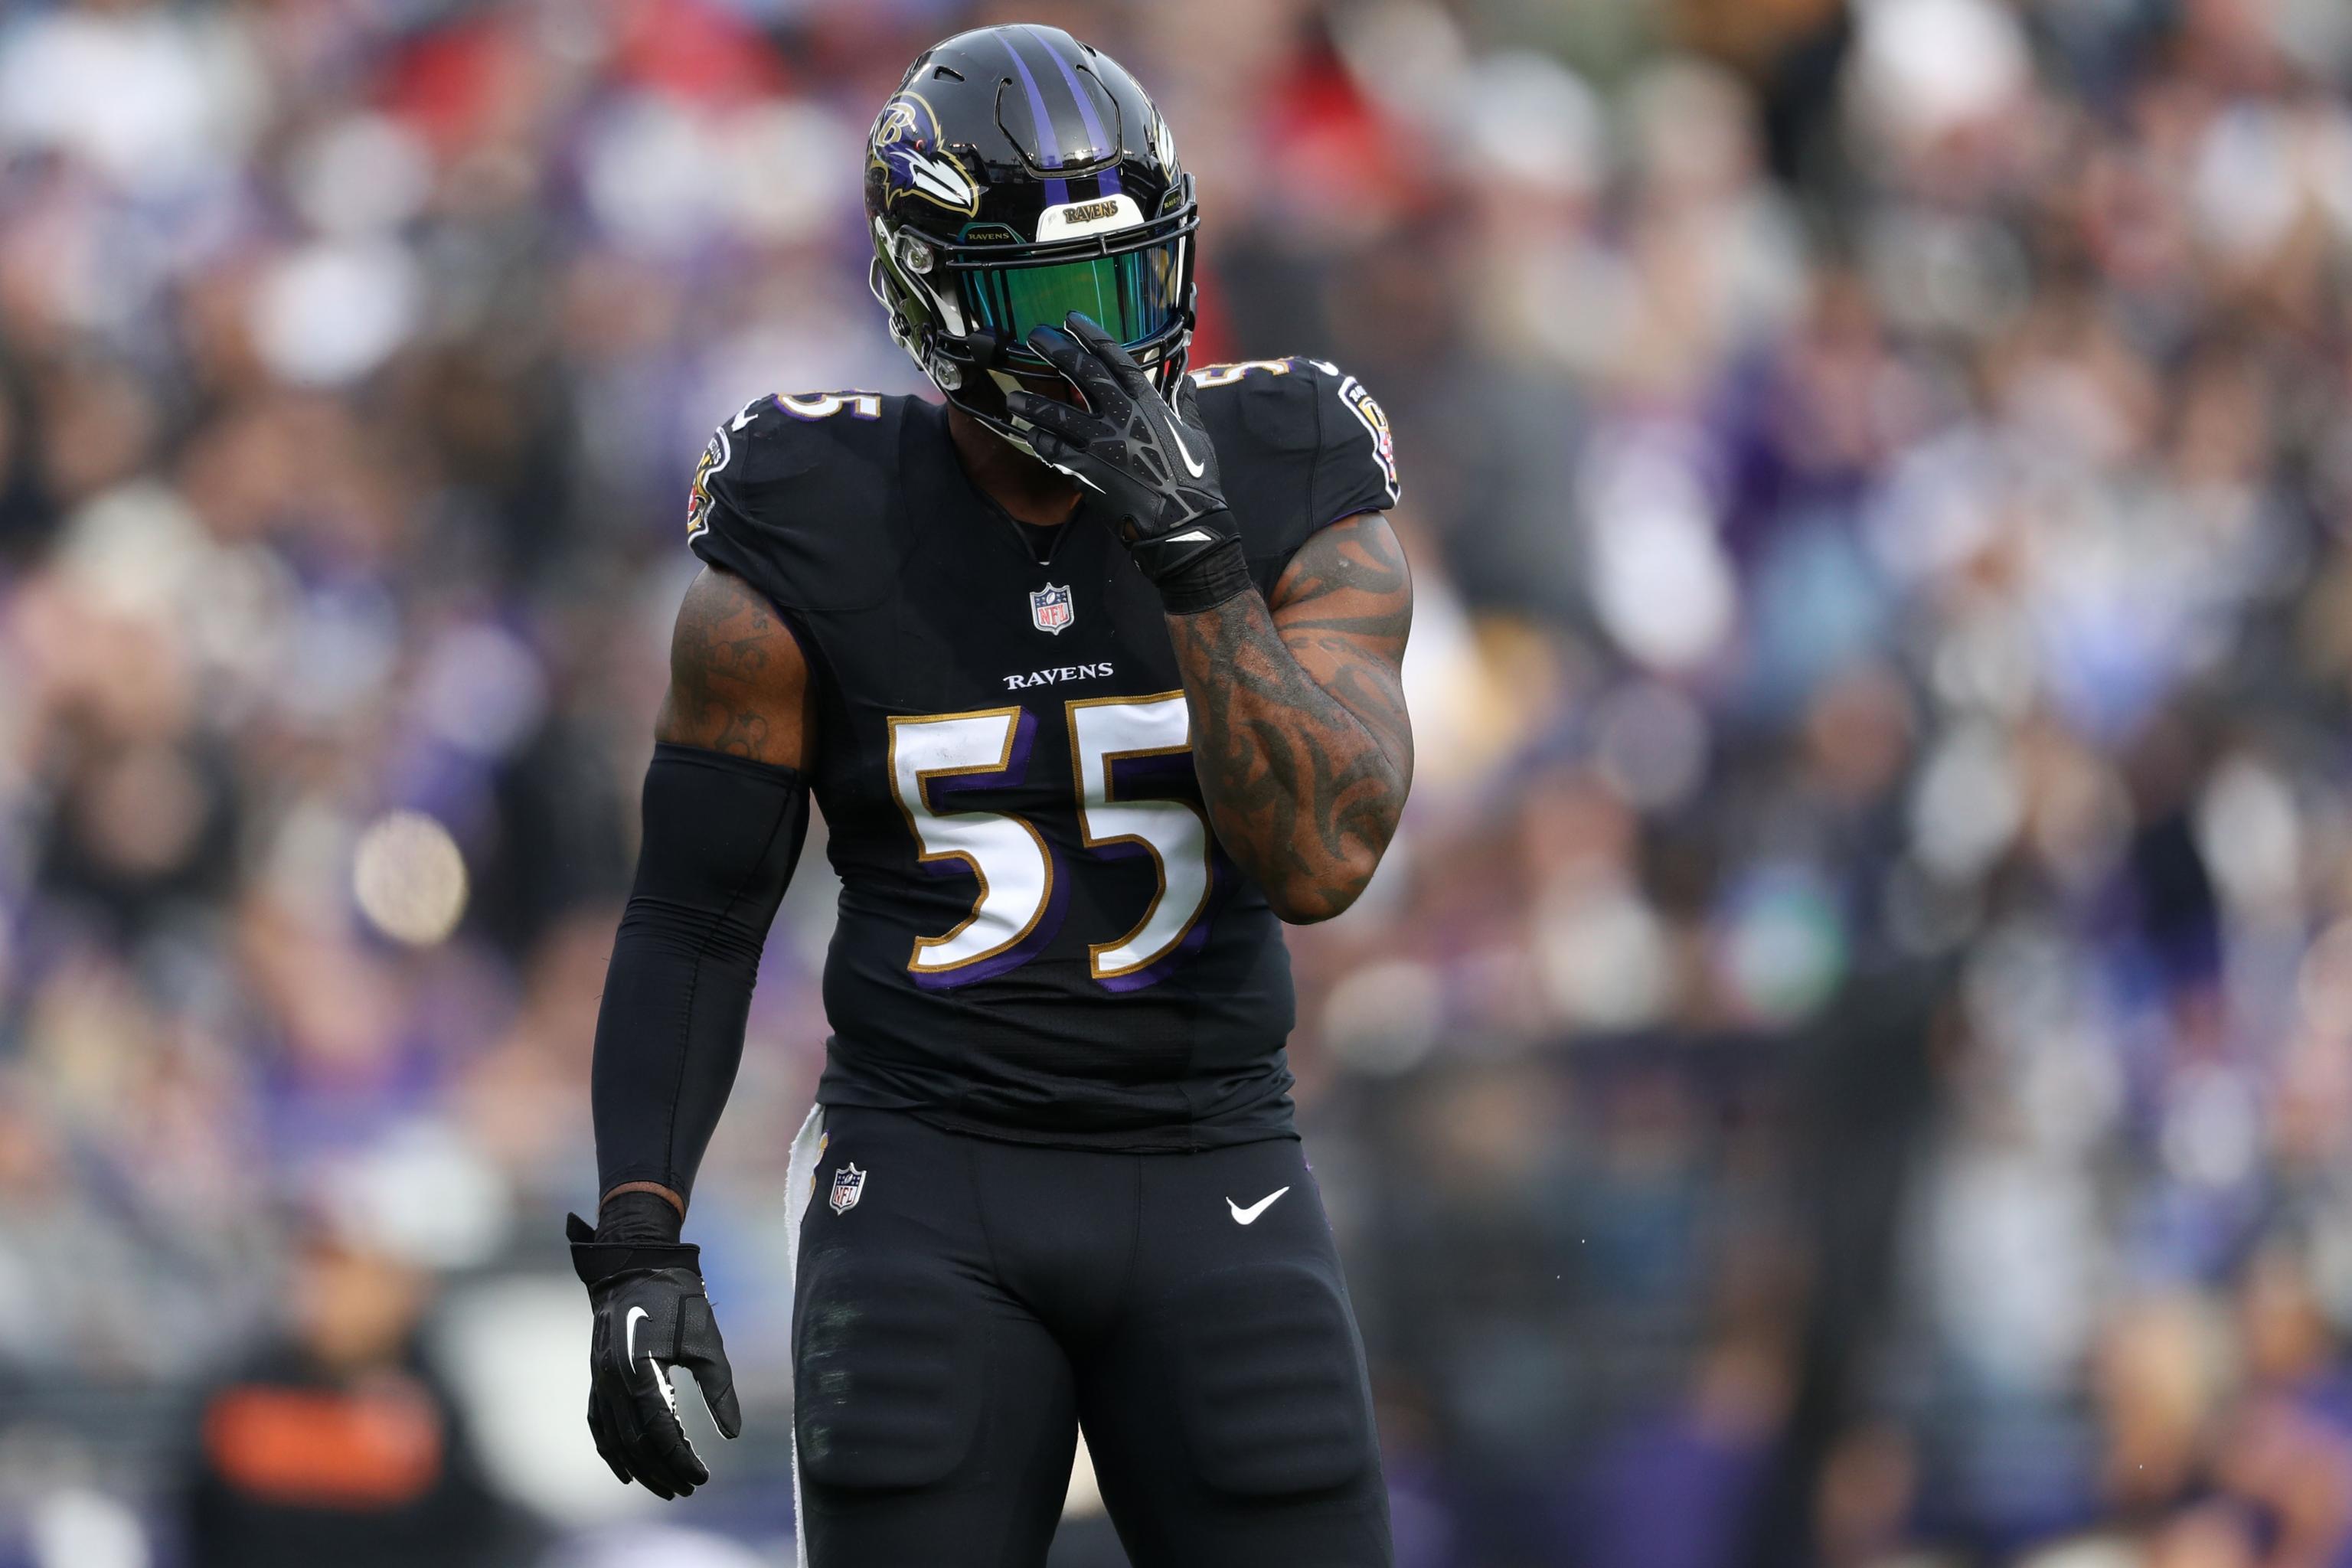 Terrell Suggs, Baltimore Ravens agree to four-year extension - ESPN